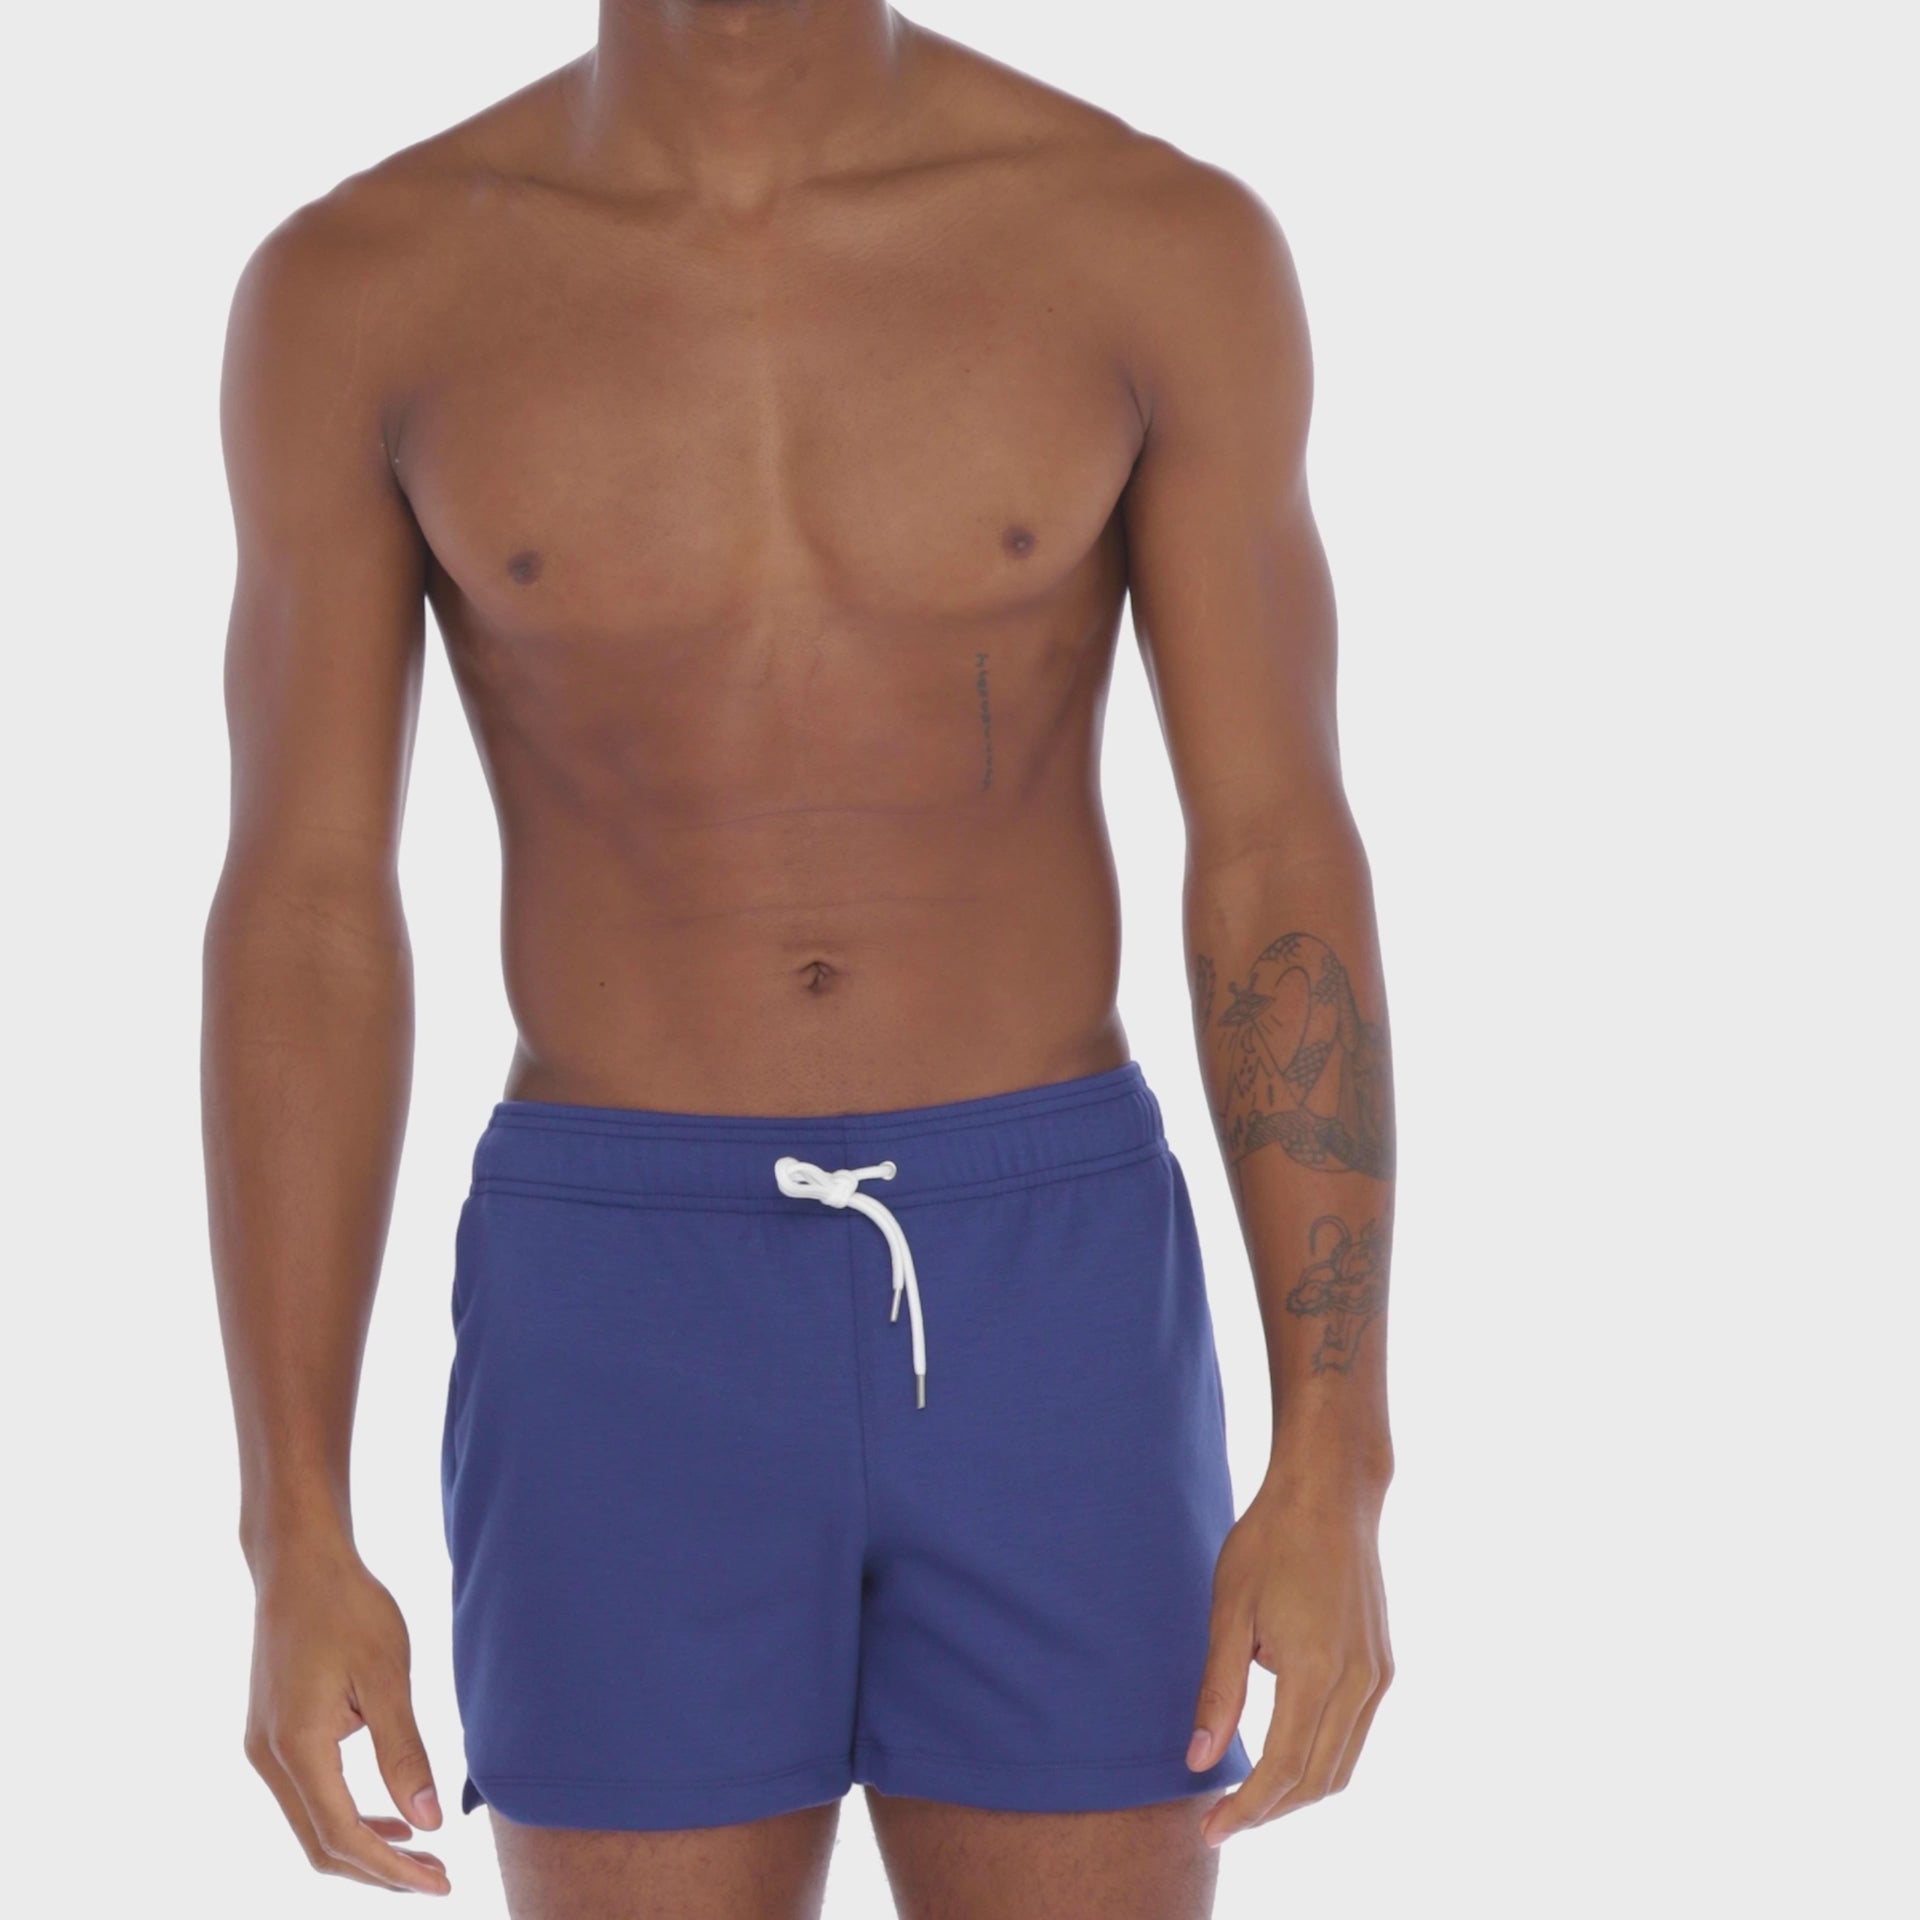 Men's Blue Leisure Sweat Short by SAMMY Menswear, an LGBTQ-Owned, Sustainable, American Brand